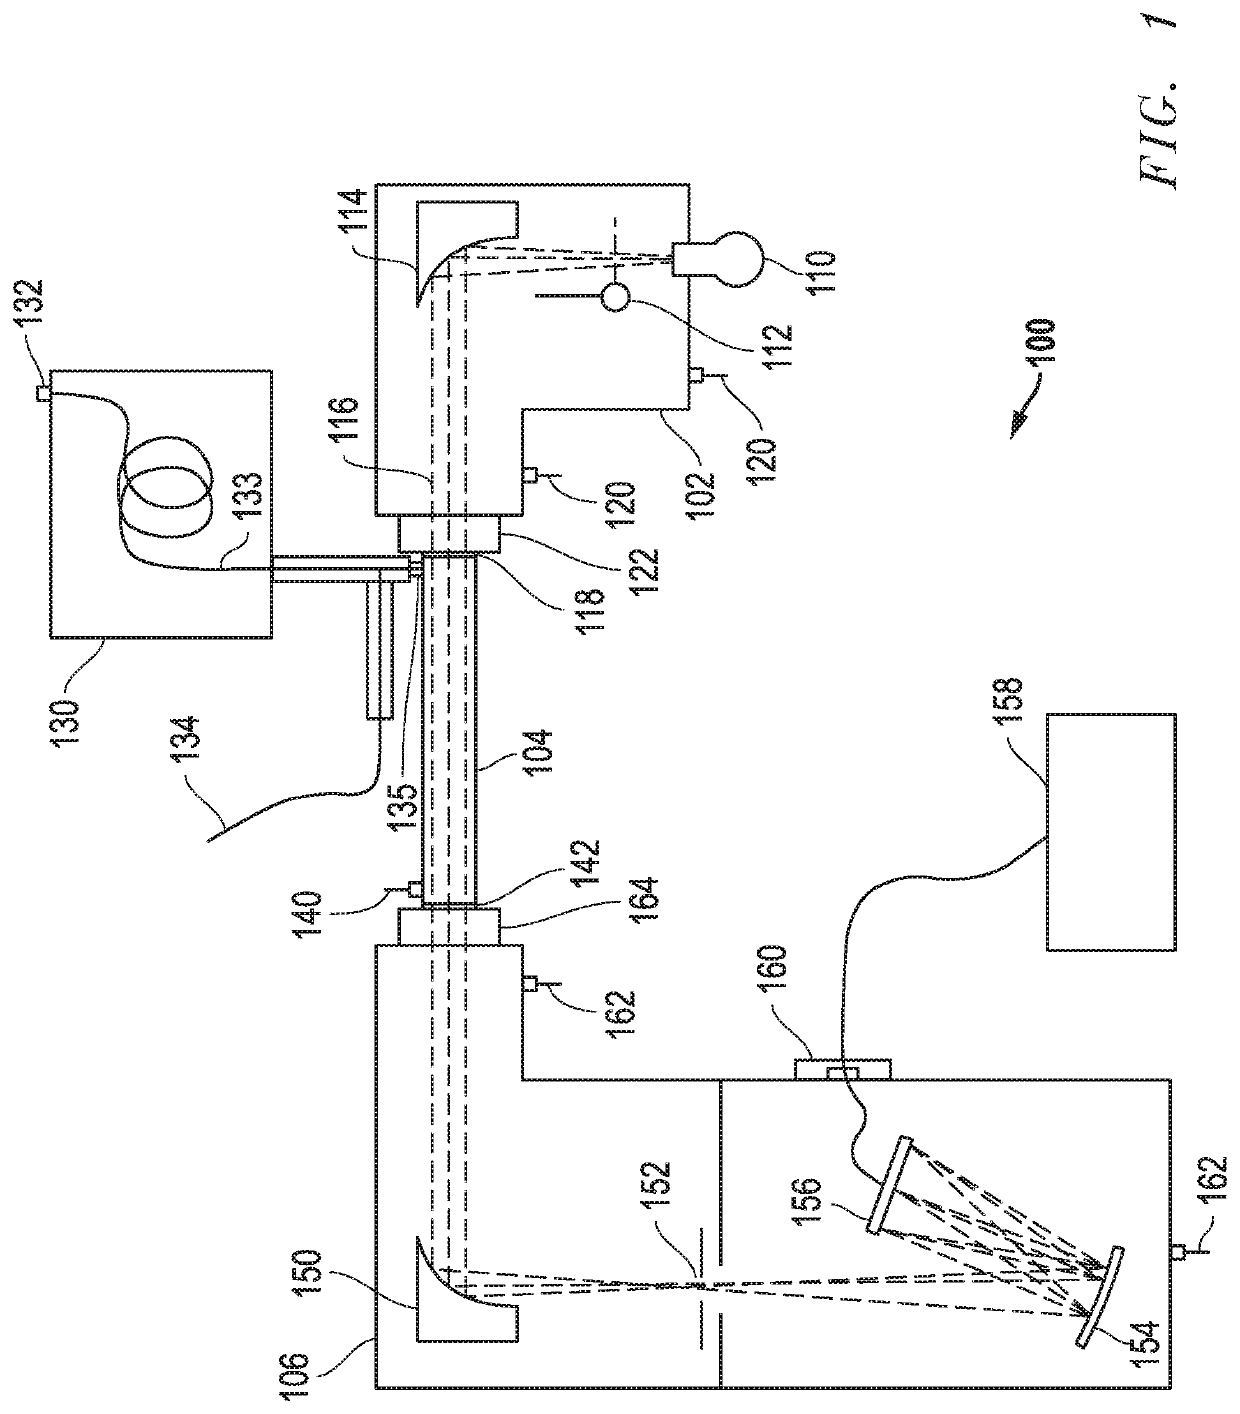 Vacuum ultraviolet absorption spectroscopy system and method